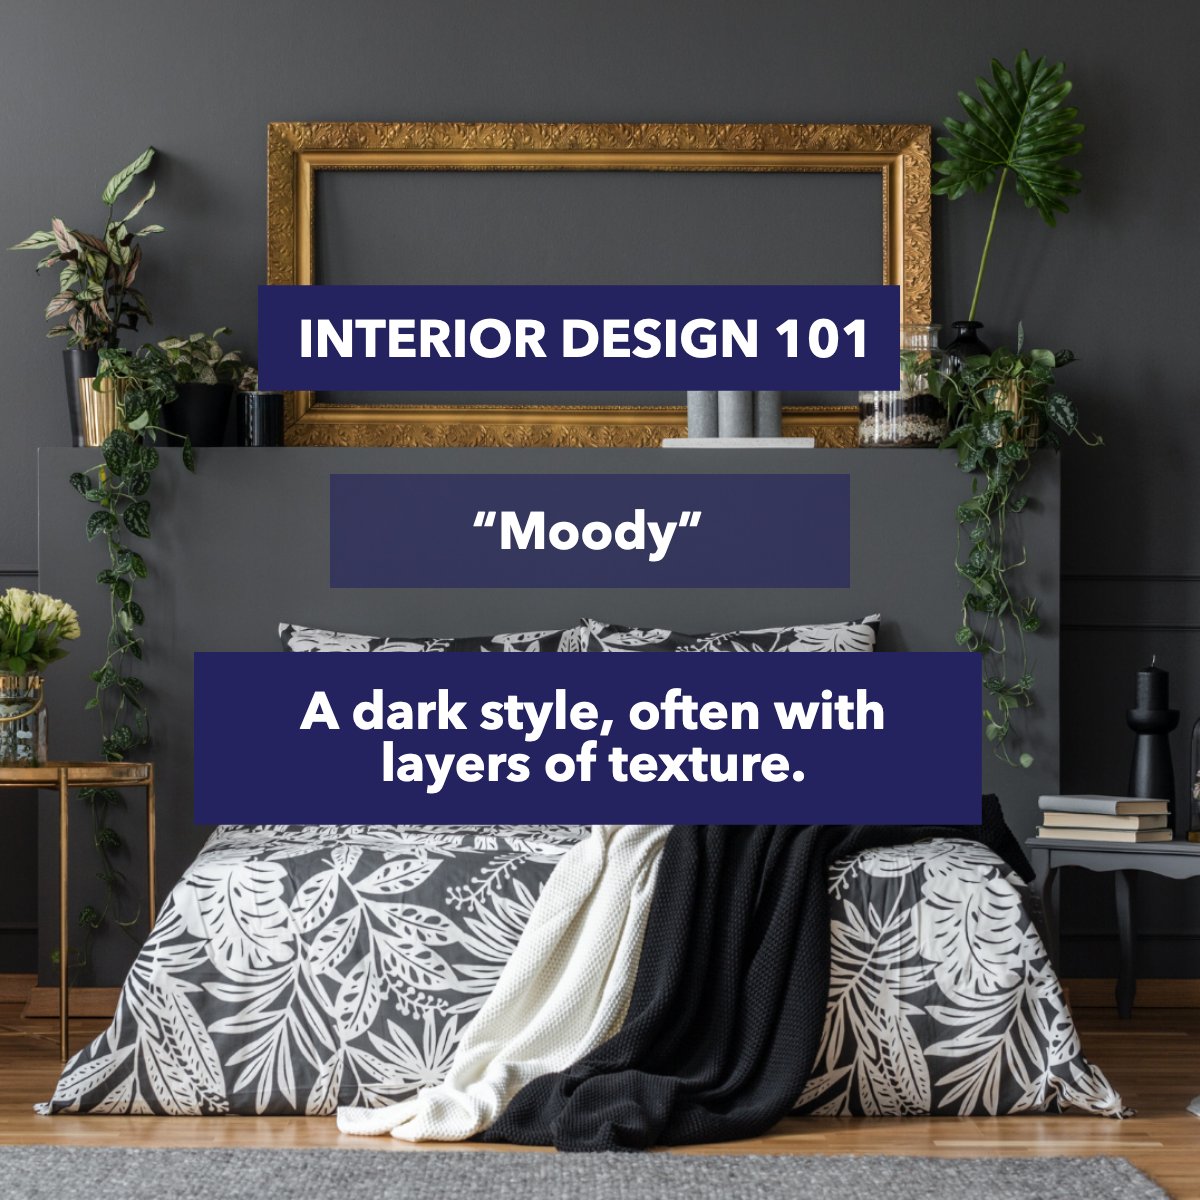 Moody is not only a mood is a style in interior design. Are you feeling moody? #interiorsdesign #interiortrends #interiordesigning #interiordesigntrends #interiorsaddict #interiordesigntips #interiordesigngoals #thefuentesteam